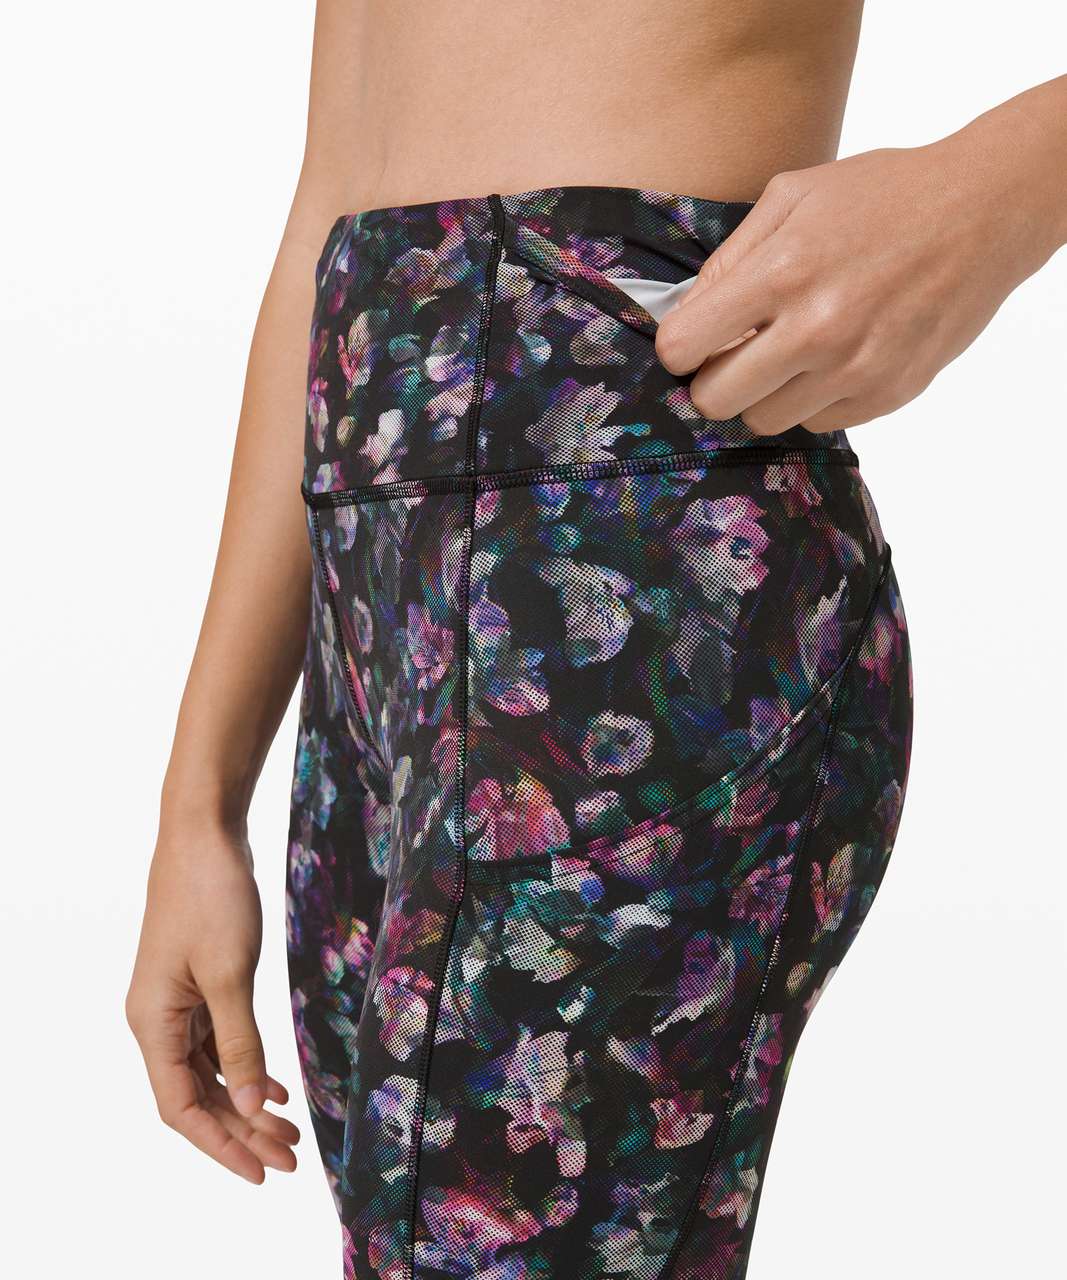 Lululemon Fast and Free Crop II 19" *Non-Reflective - Activate Floral Multi